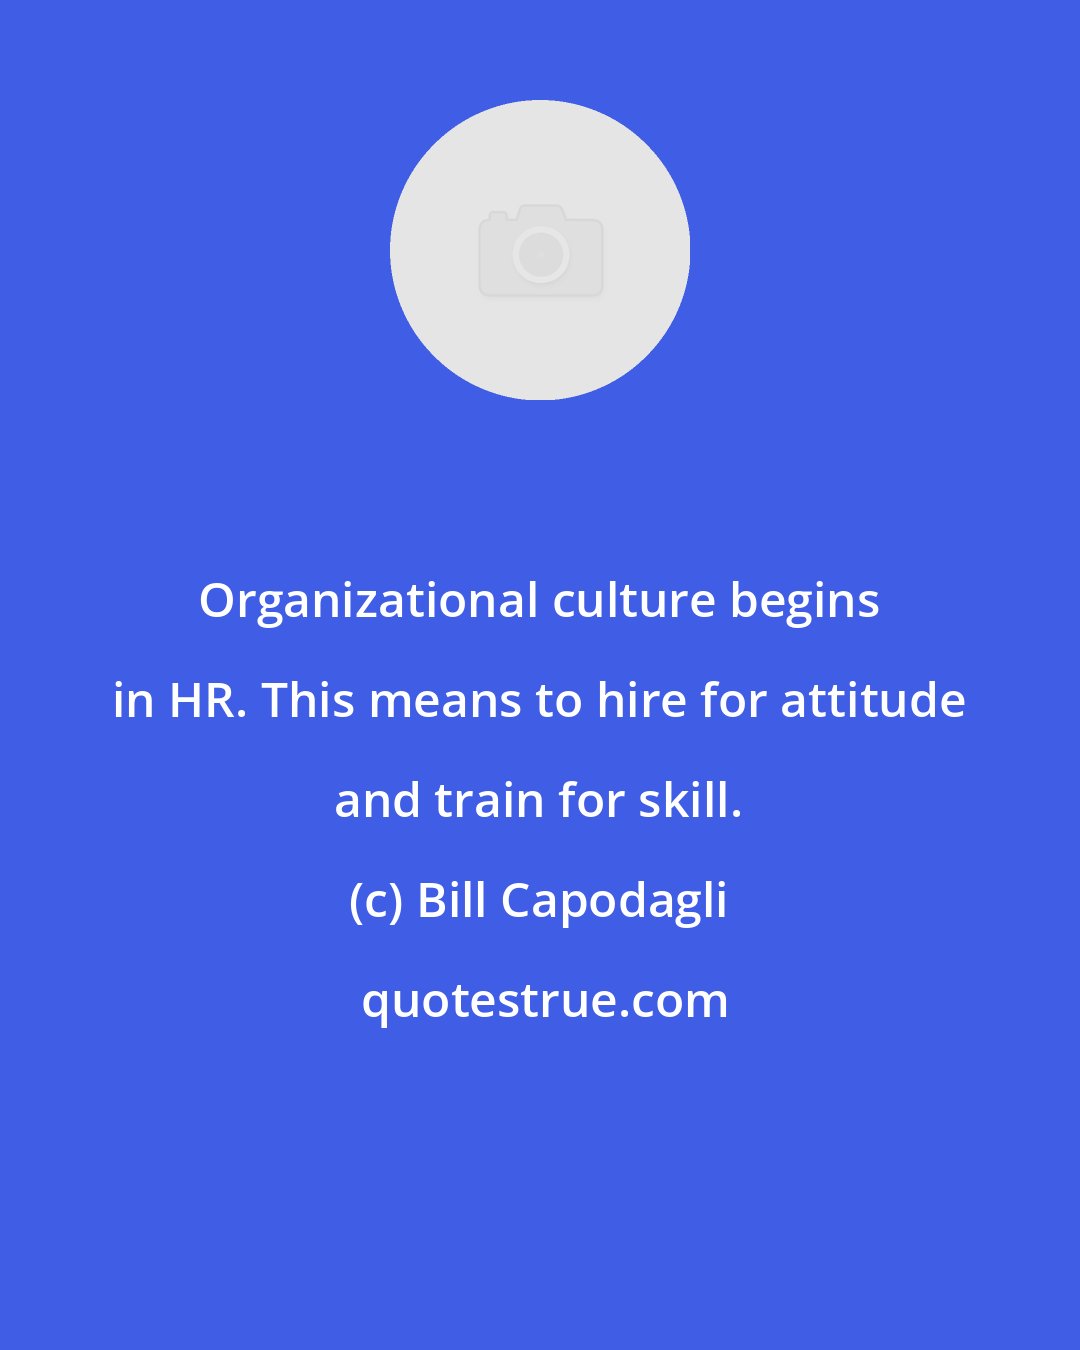 Bill Capodagli: Organizational culture begins in HR. This means to hire for attitude and train for skill.